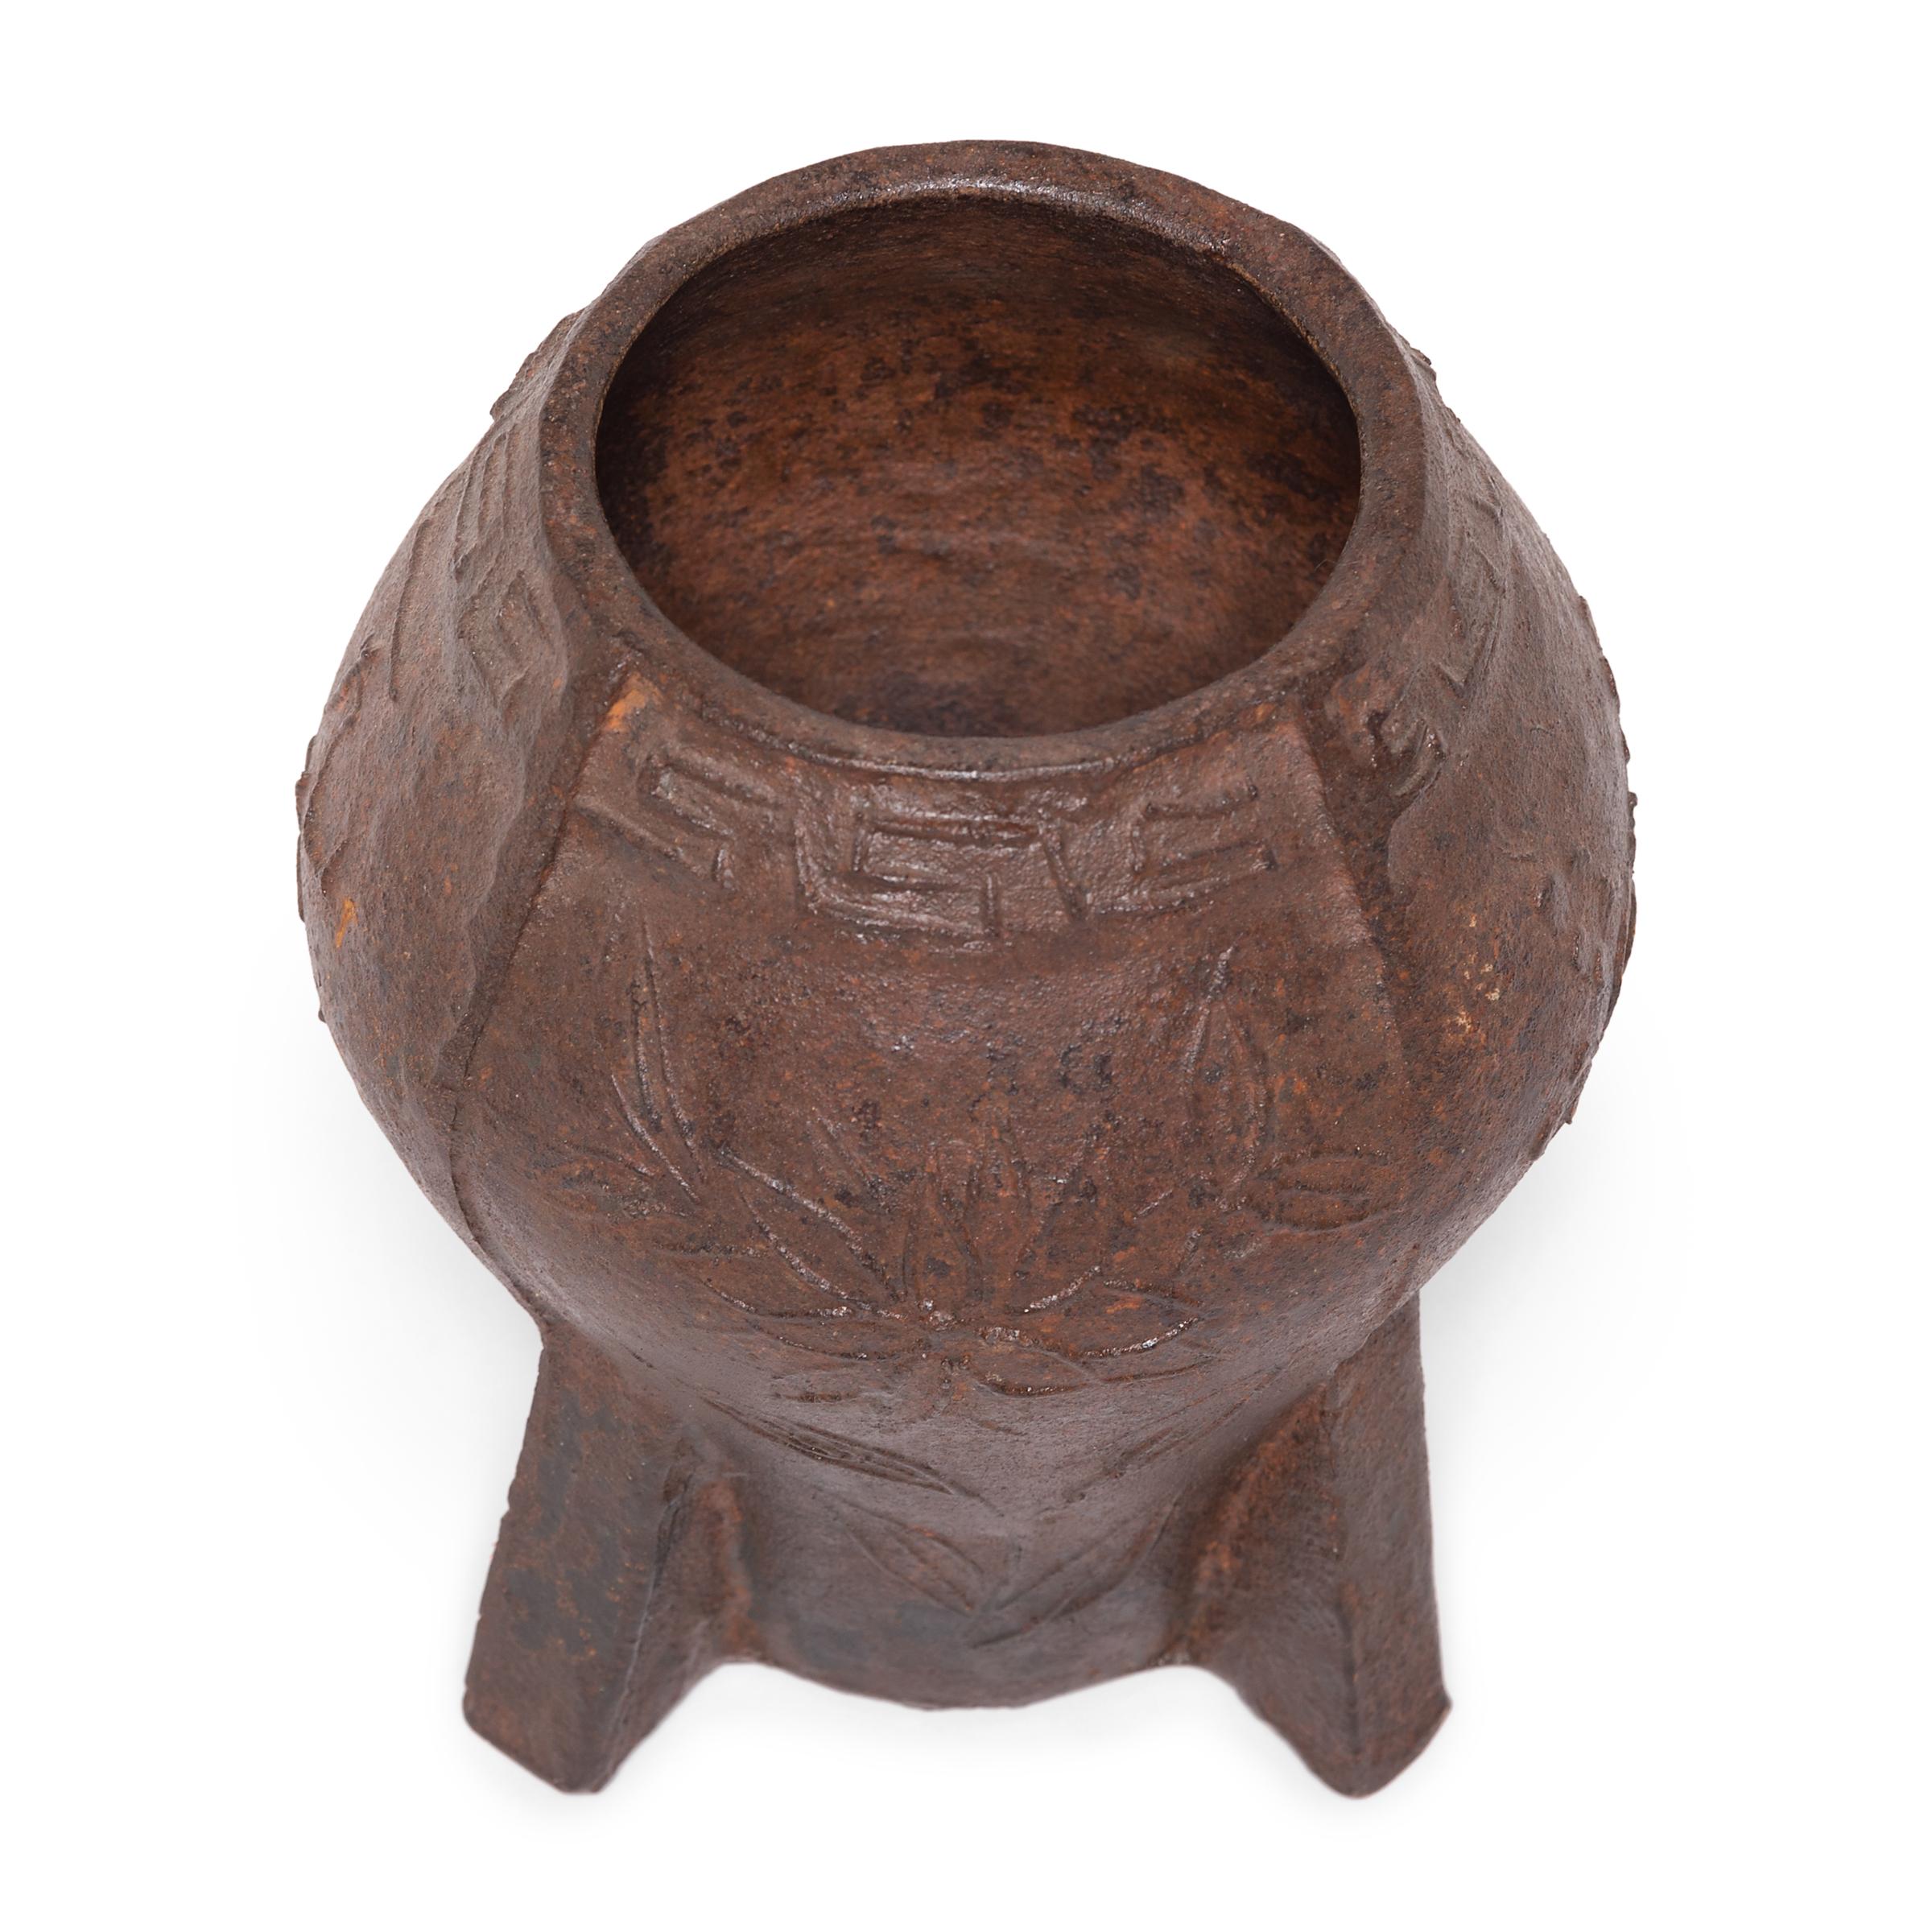 This vintage cast iron mortar and pestle from is from China's Shanxi province and is patterned in low relief with floral motifs. It was originally used in a traditional apothecary to create herbal medicine, but we love this piece as an unexpected